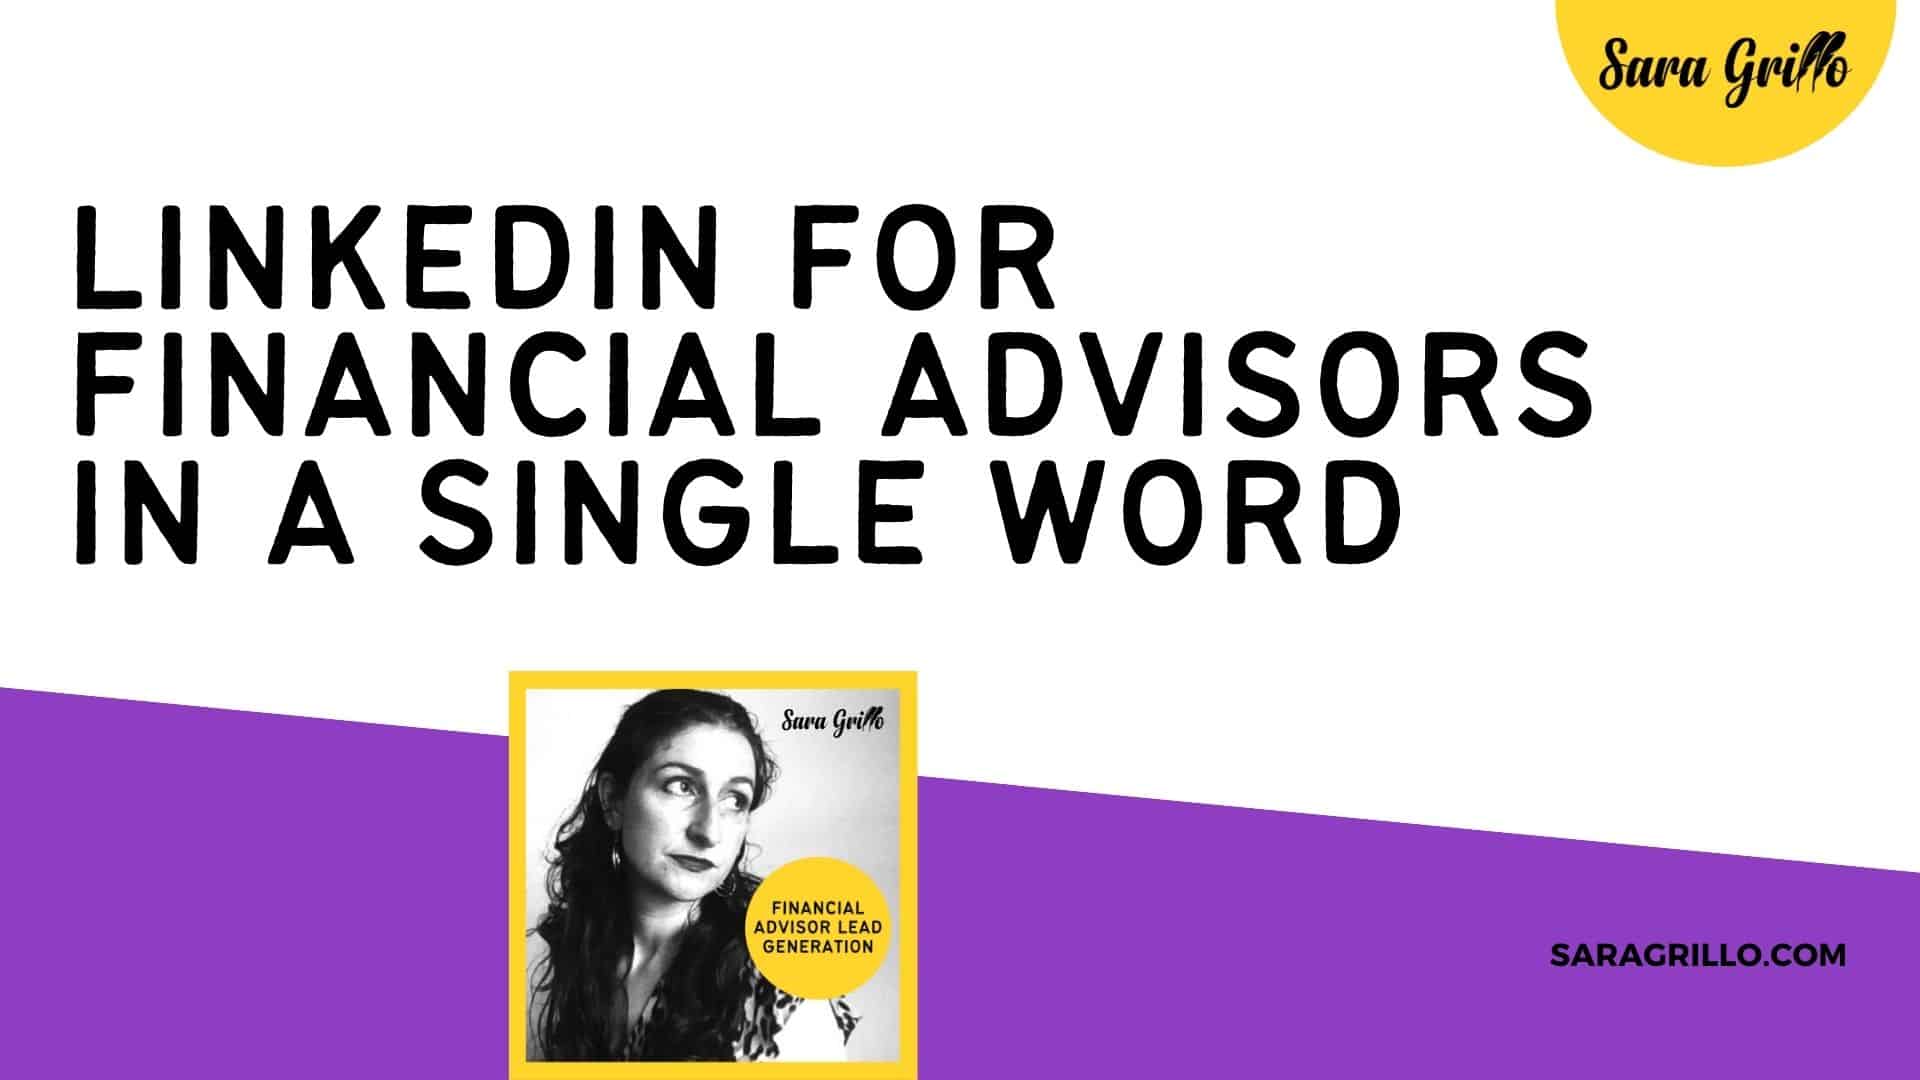 LinkedIn for financial advisors can be summarized in one single word. Read this blog to find out what it is.